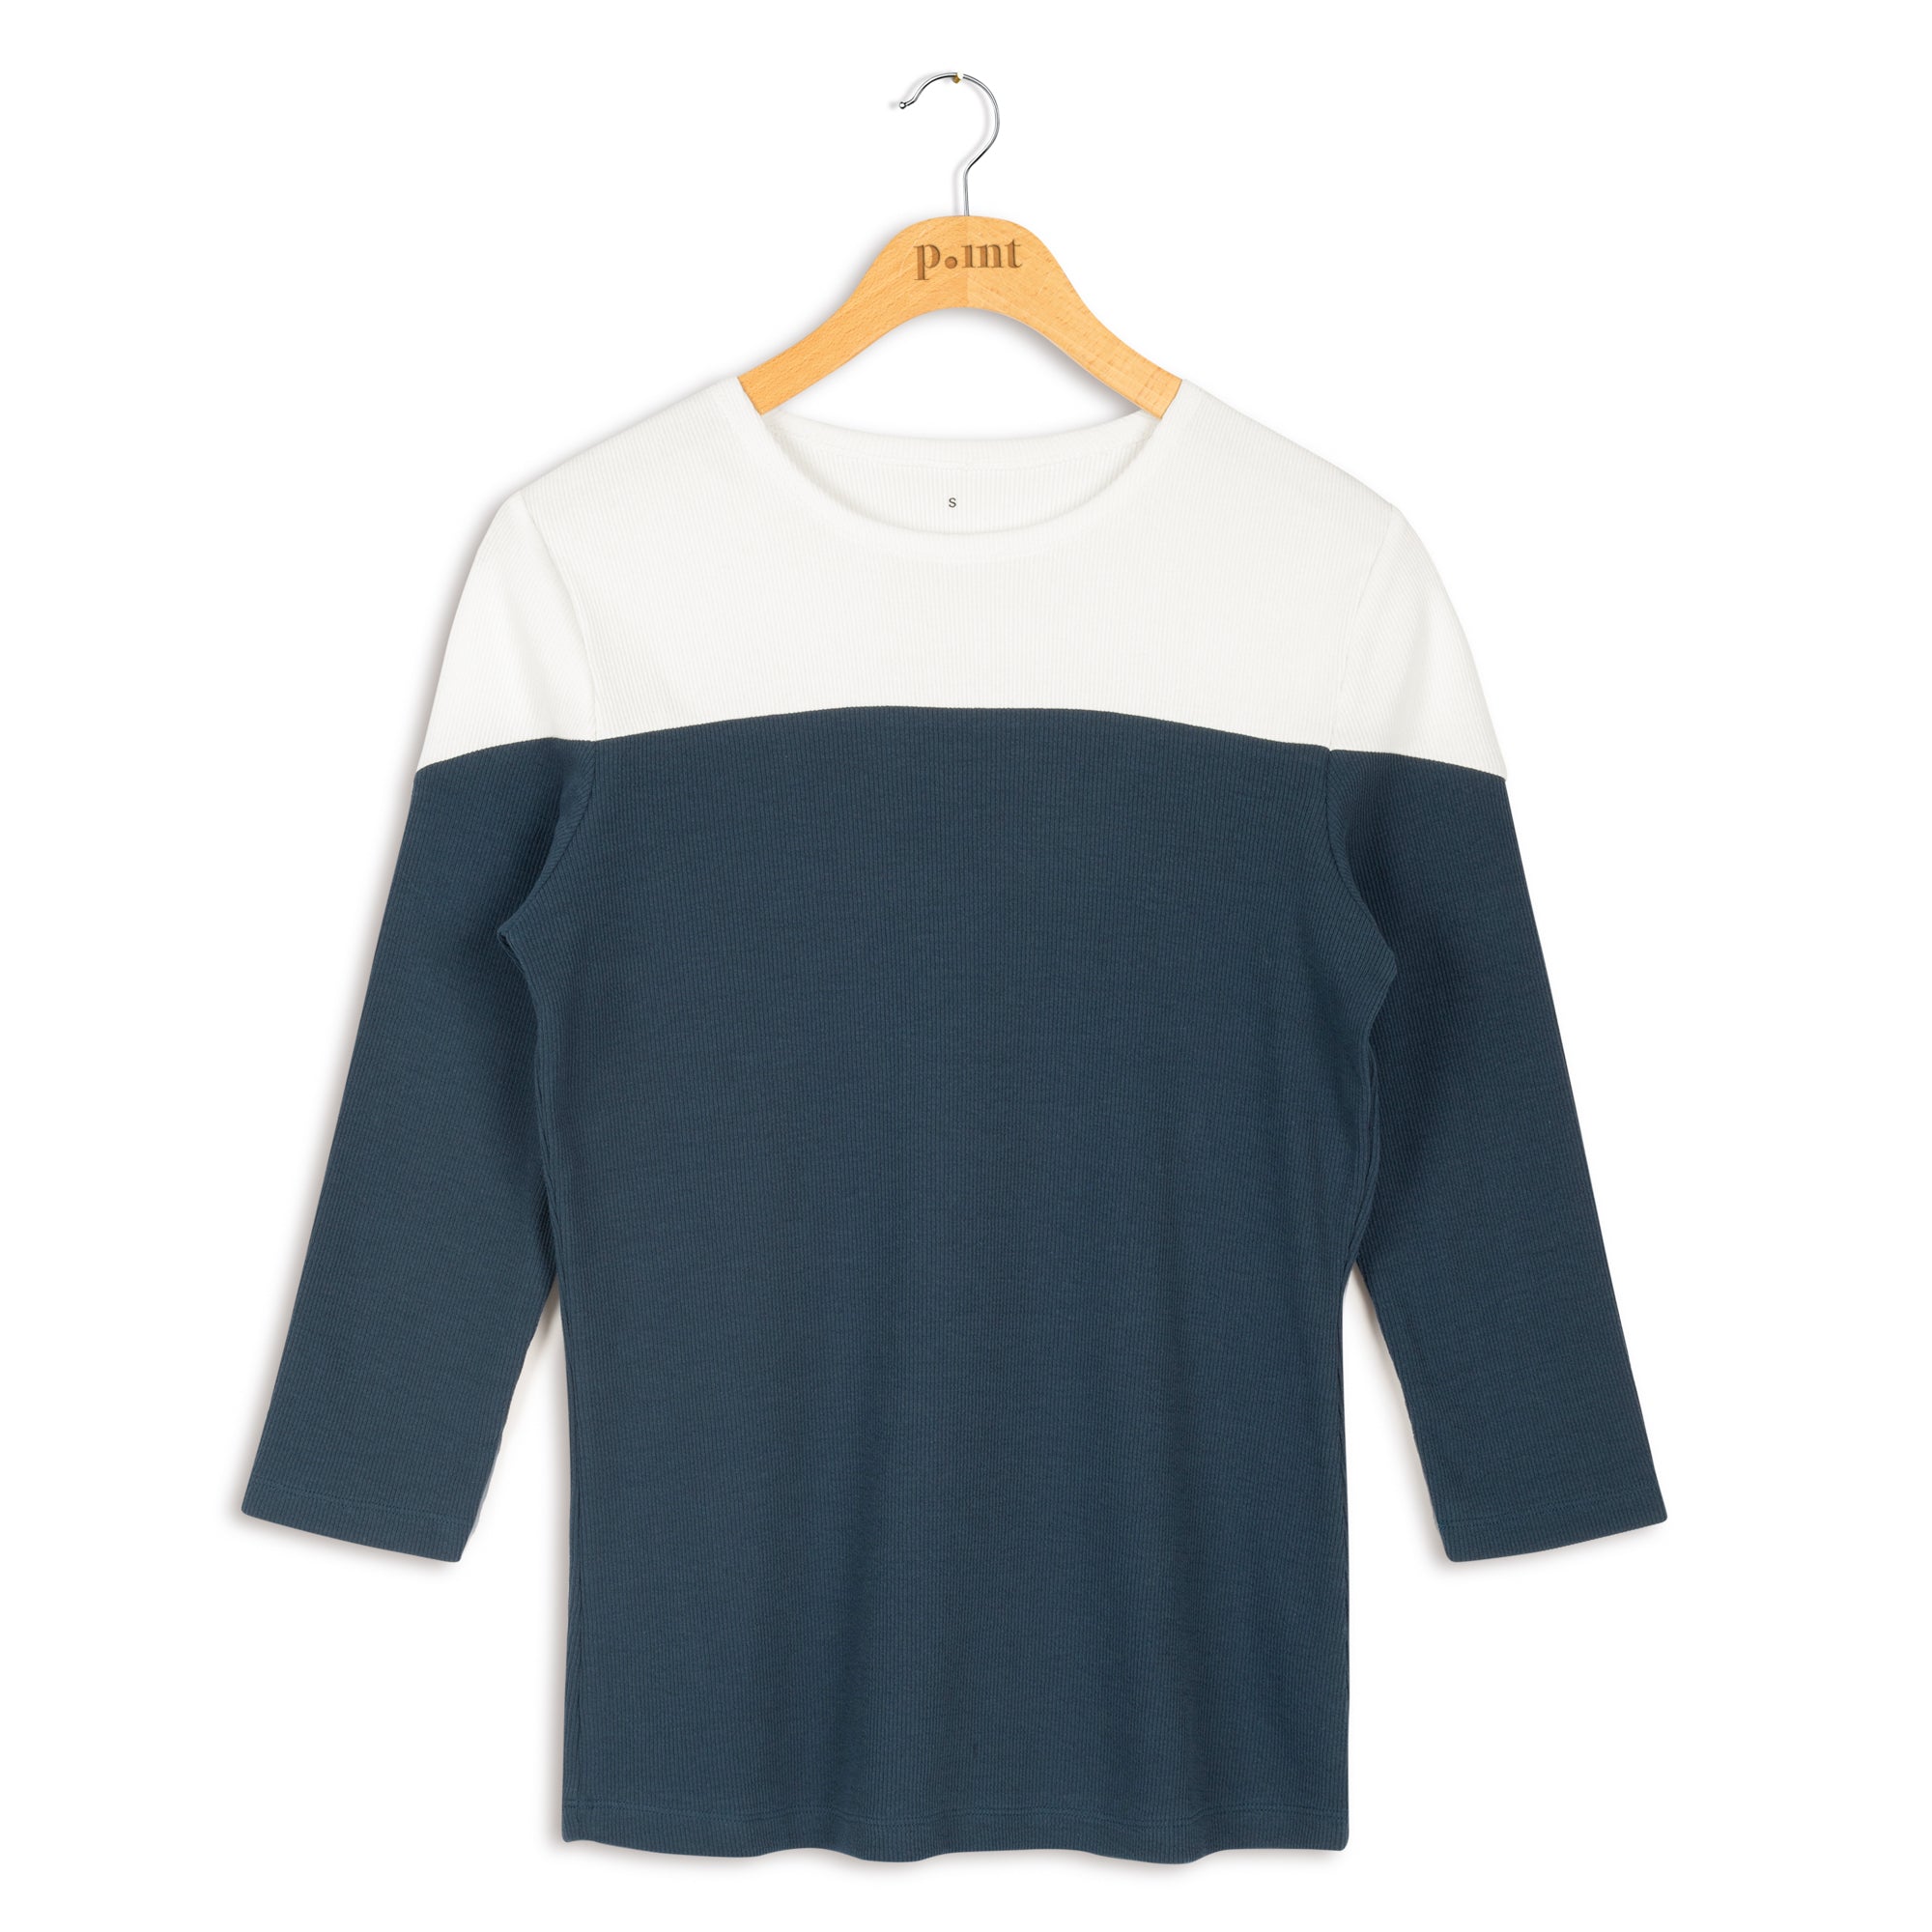 Point Ribbed Colorblock Crewneck Top - Tops